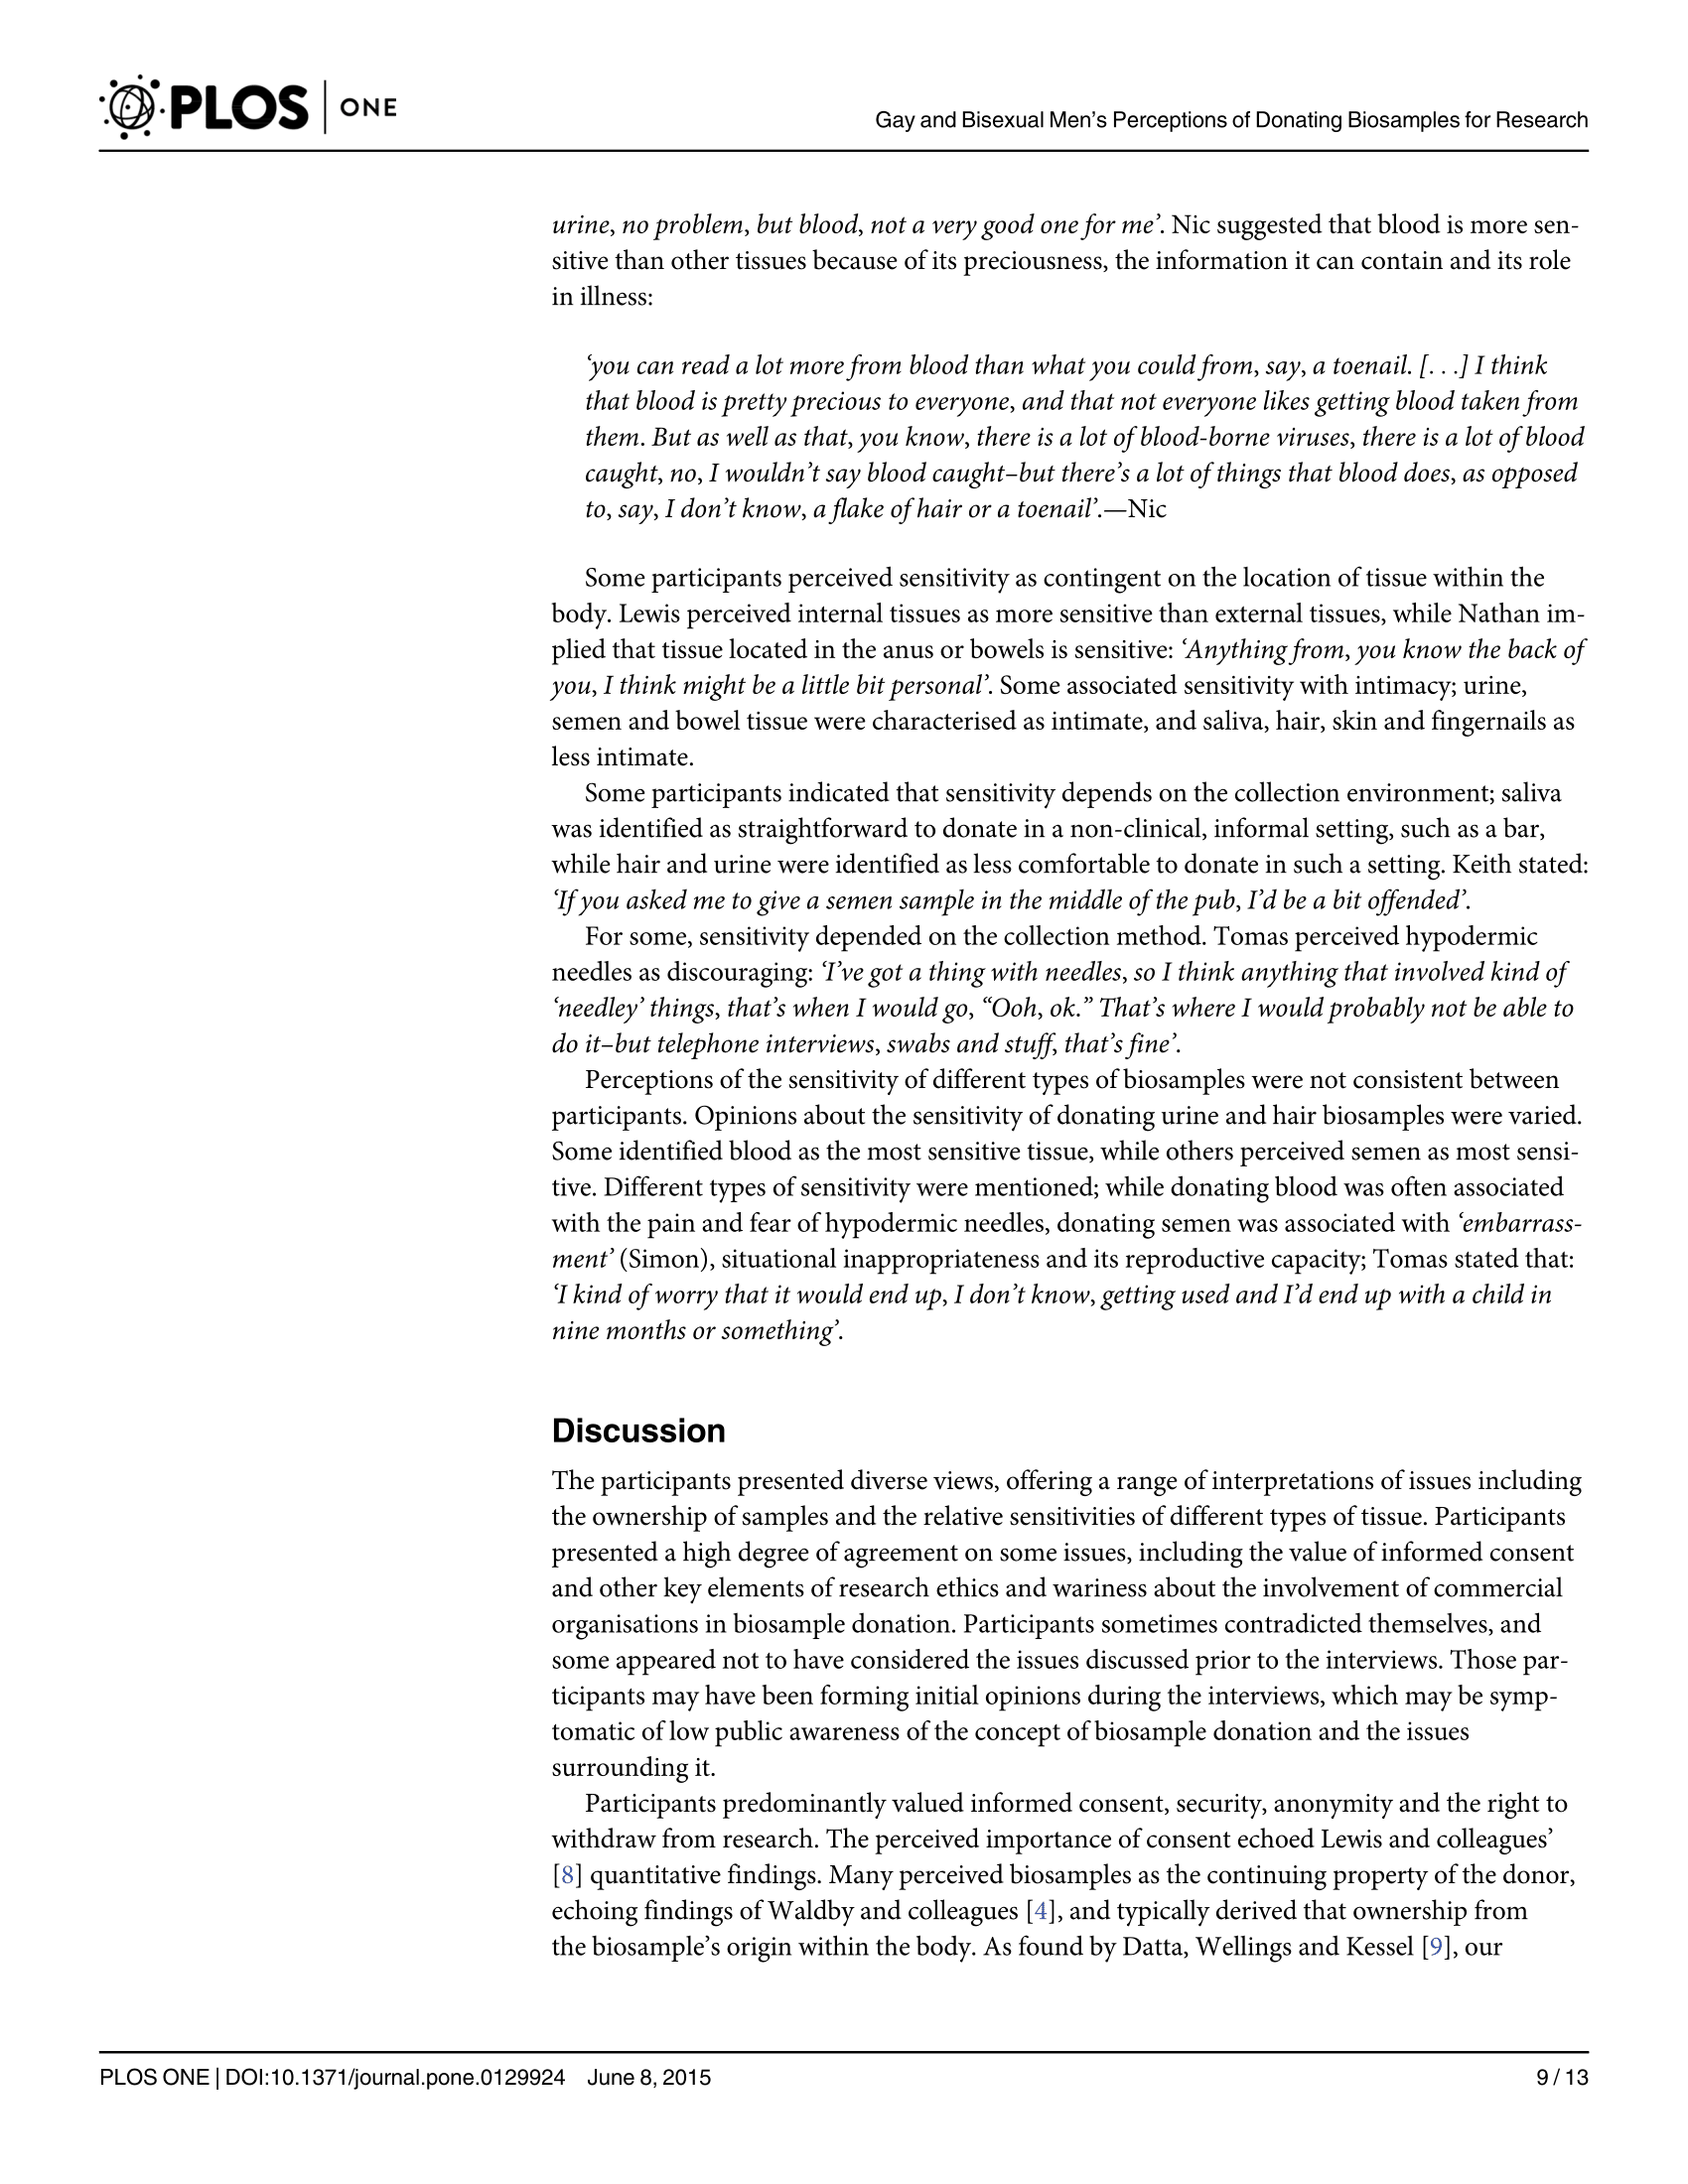 discussion section of a research paper sample